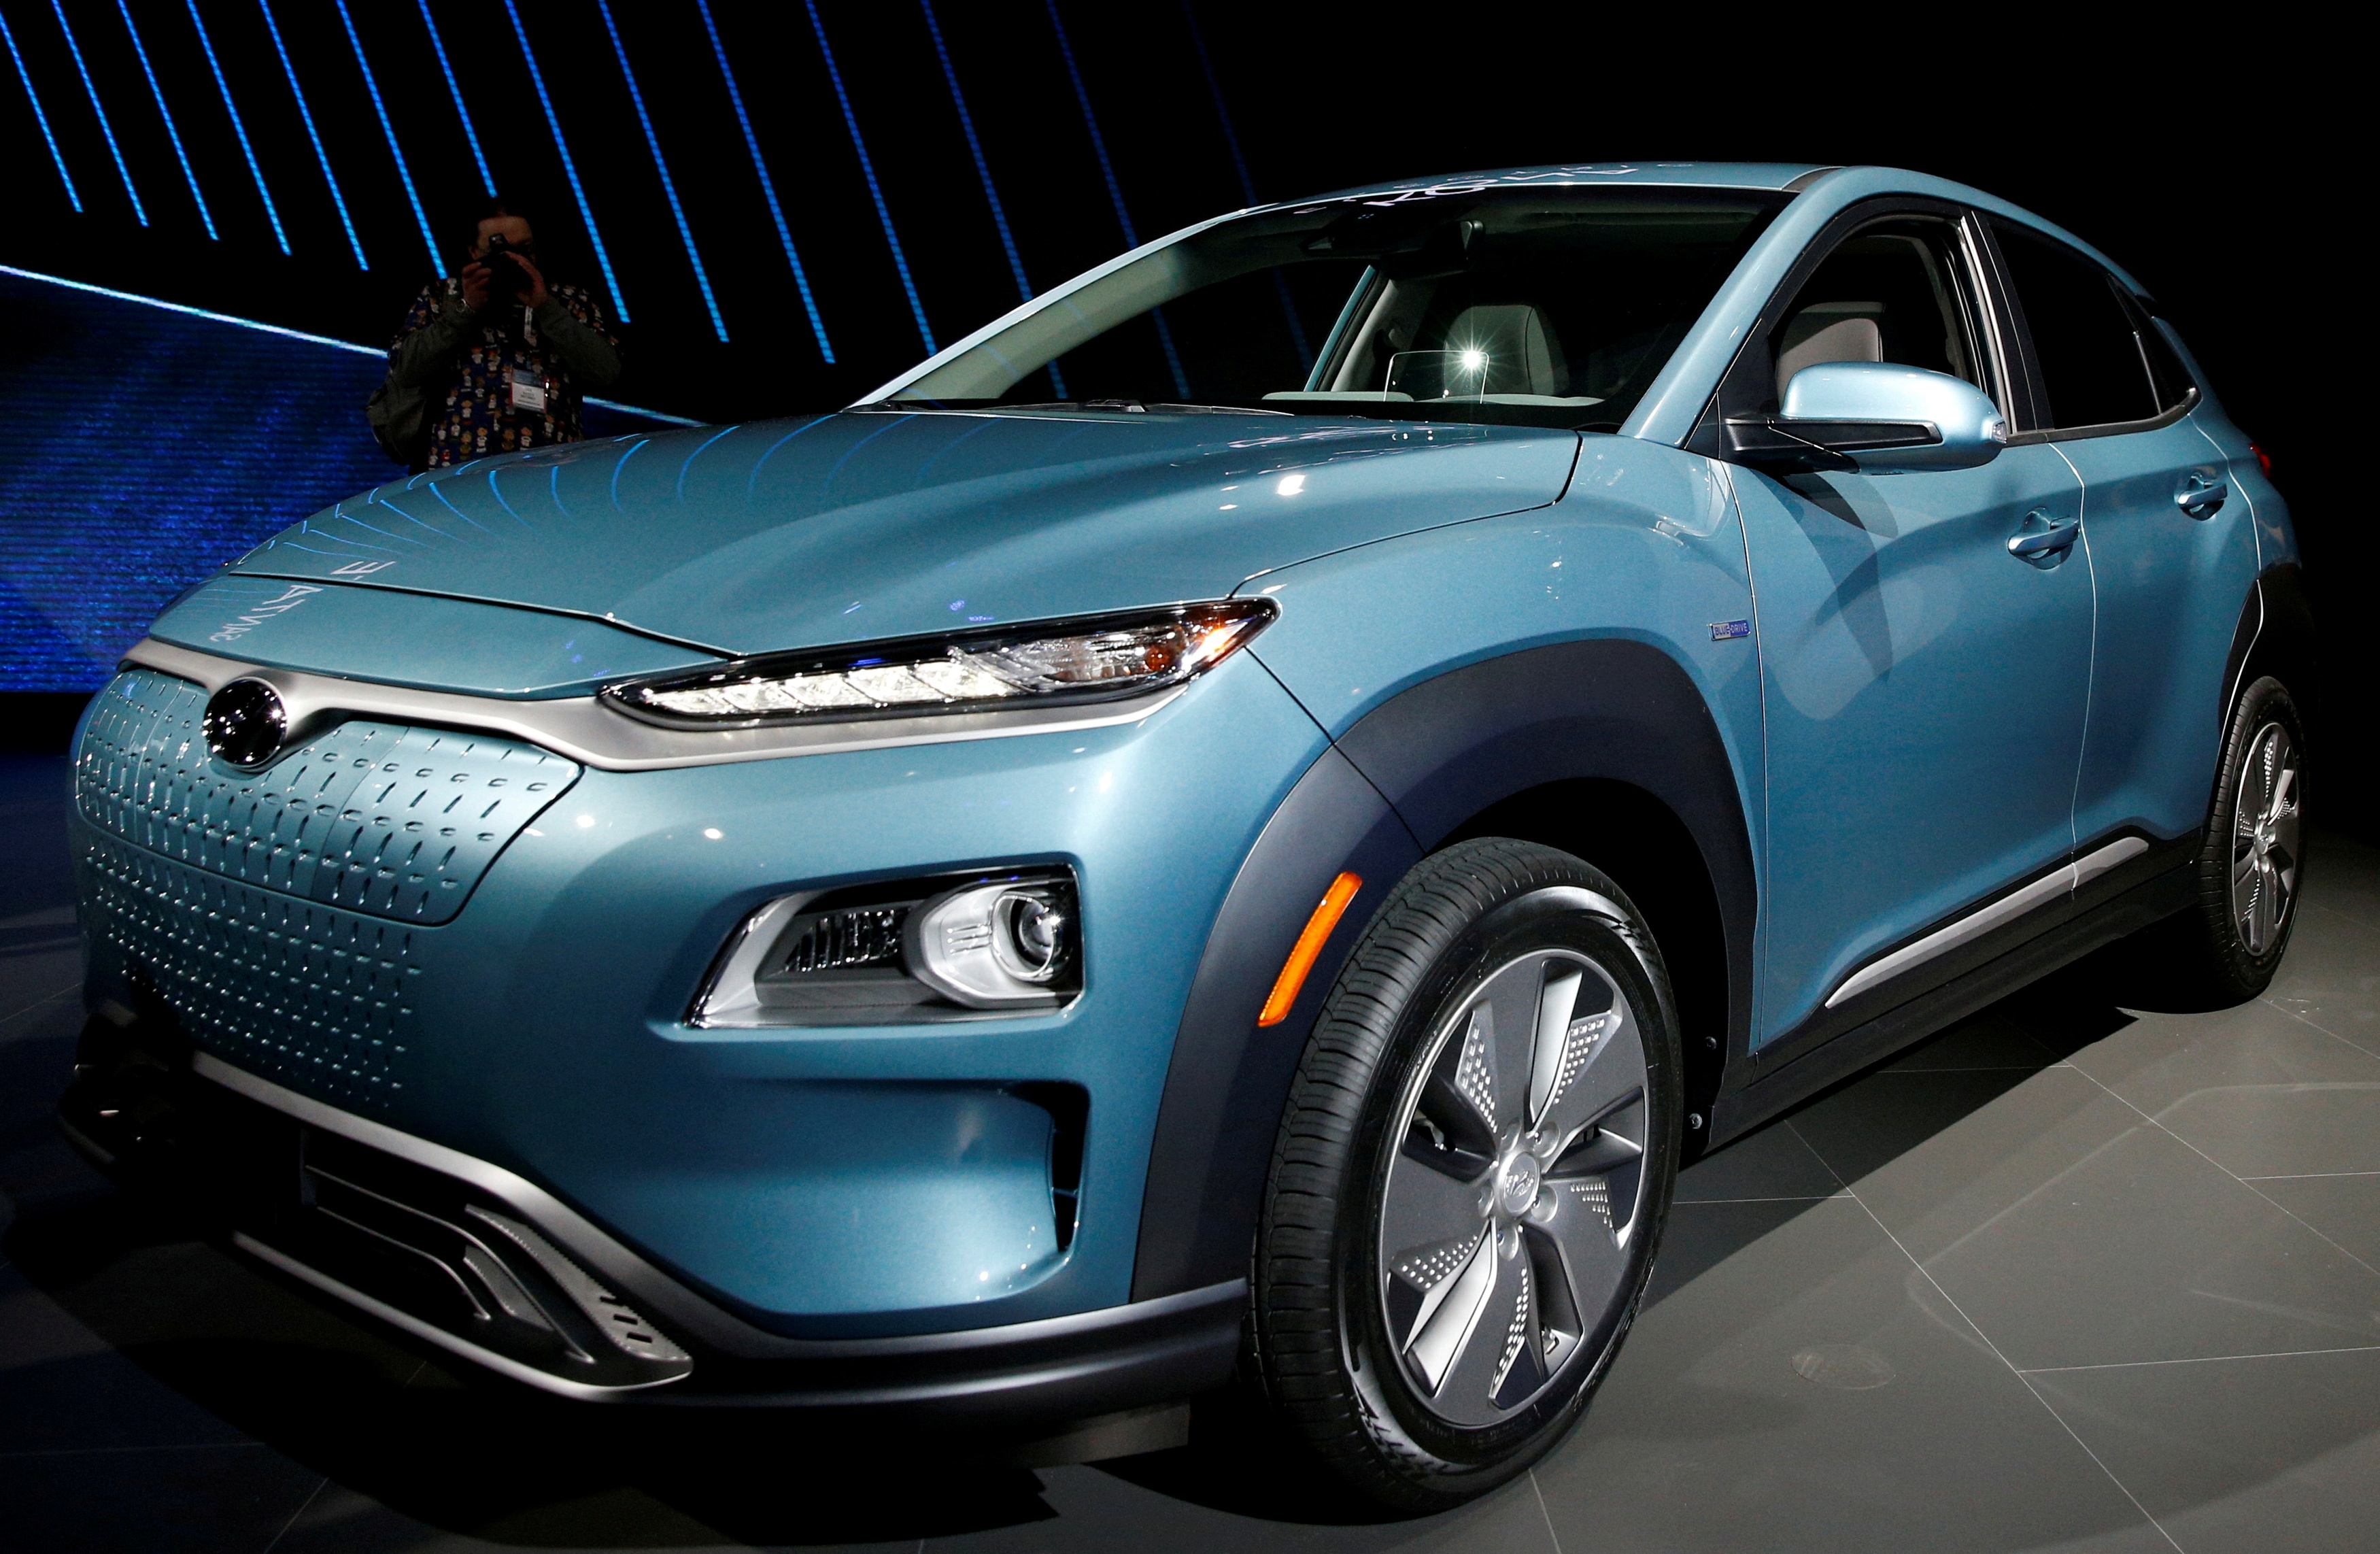 2019 Hyundai Kona Electric vehicle is displayed at the New York Auto Show in New York